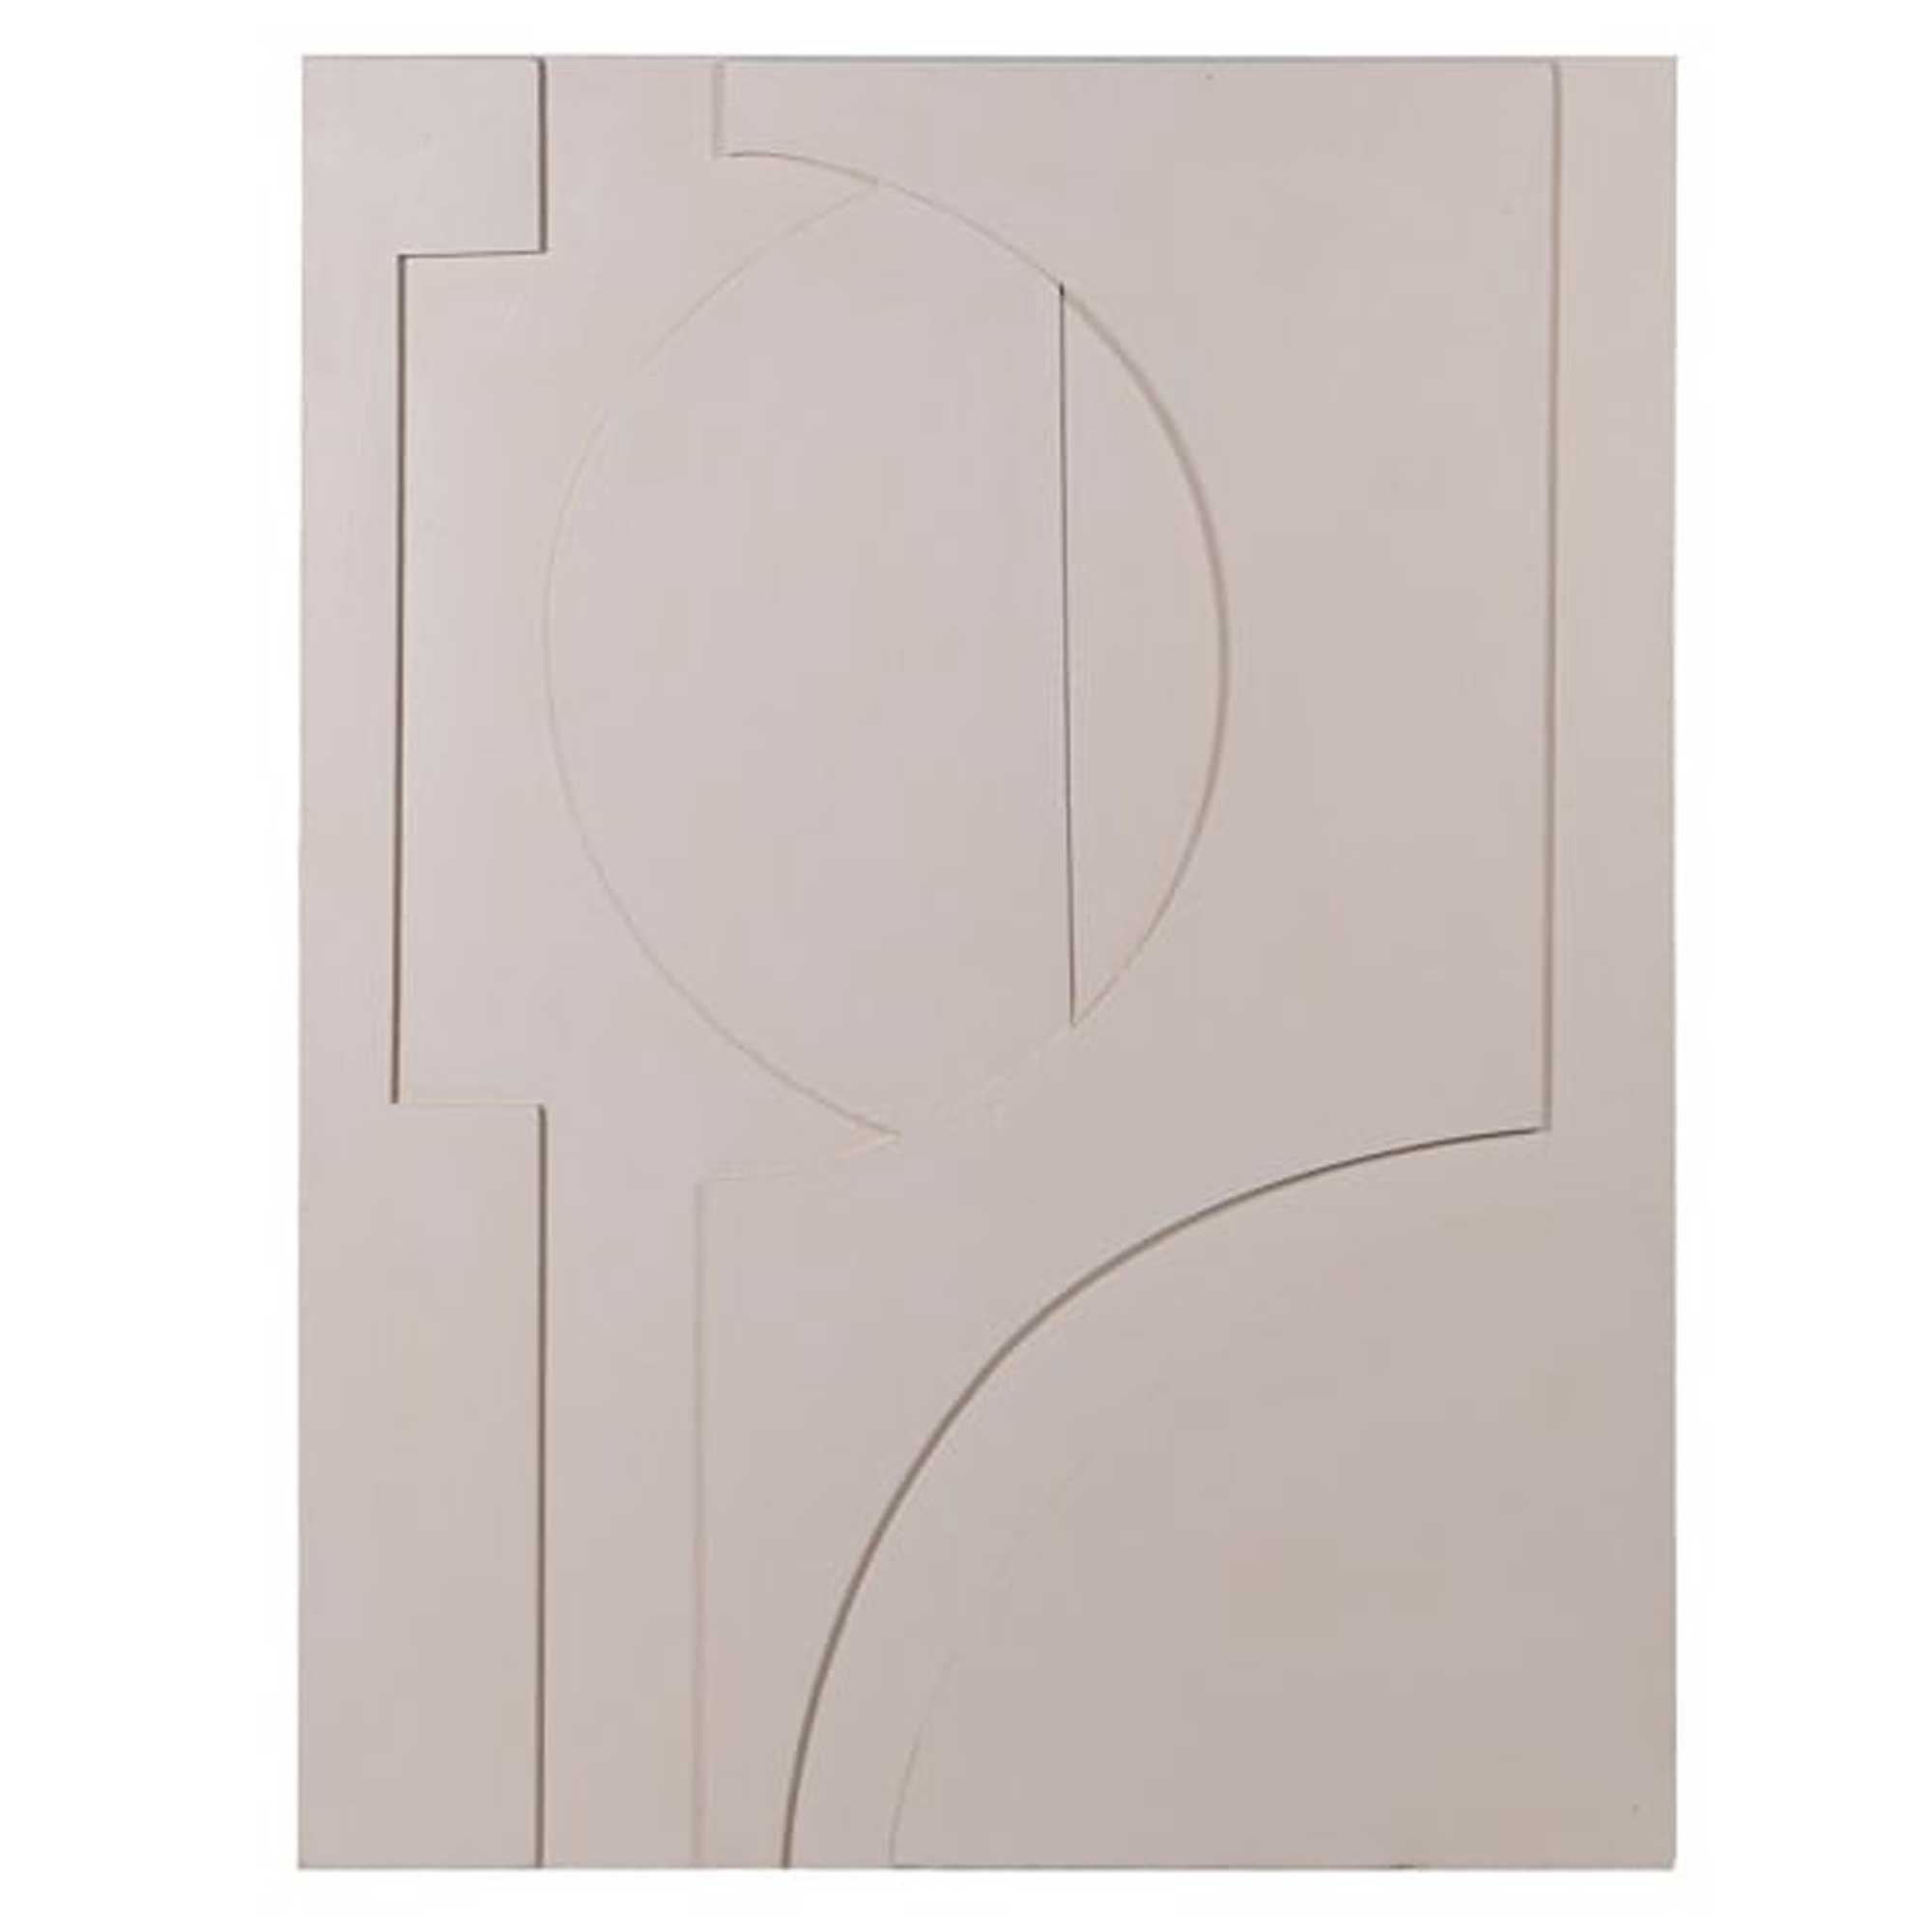 Abstract Curve Canvas Print, Square, Neutral | Barker & Stonehouse